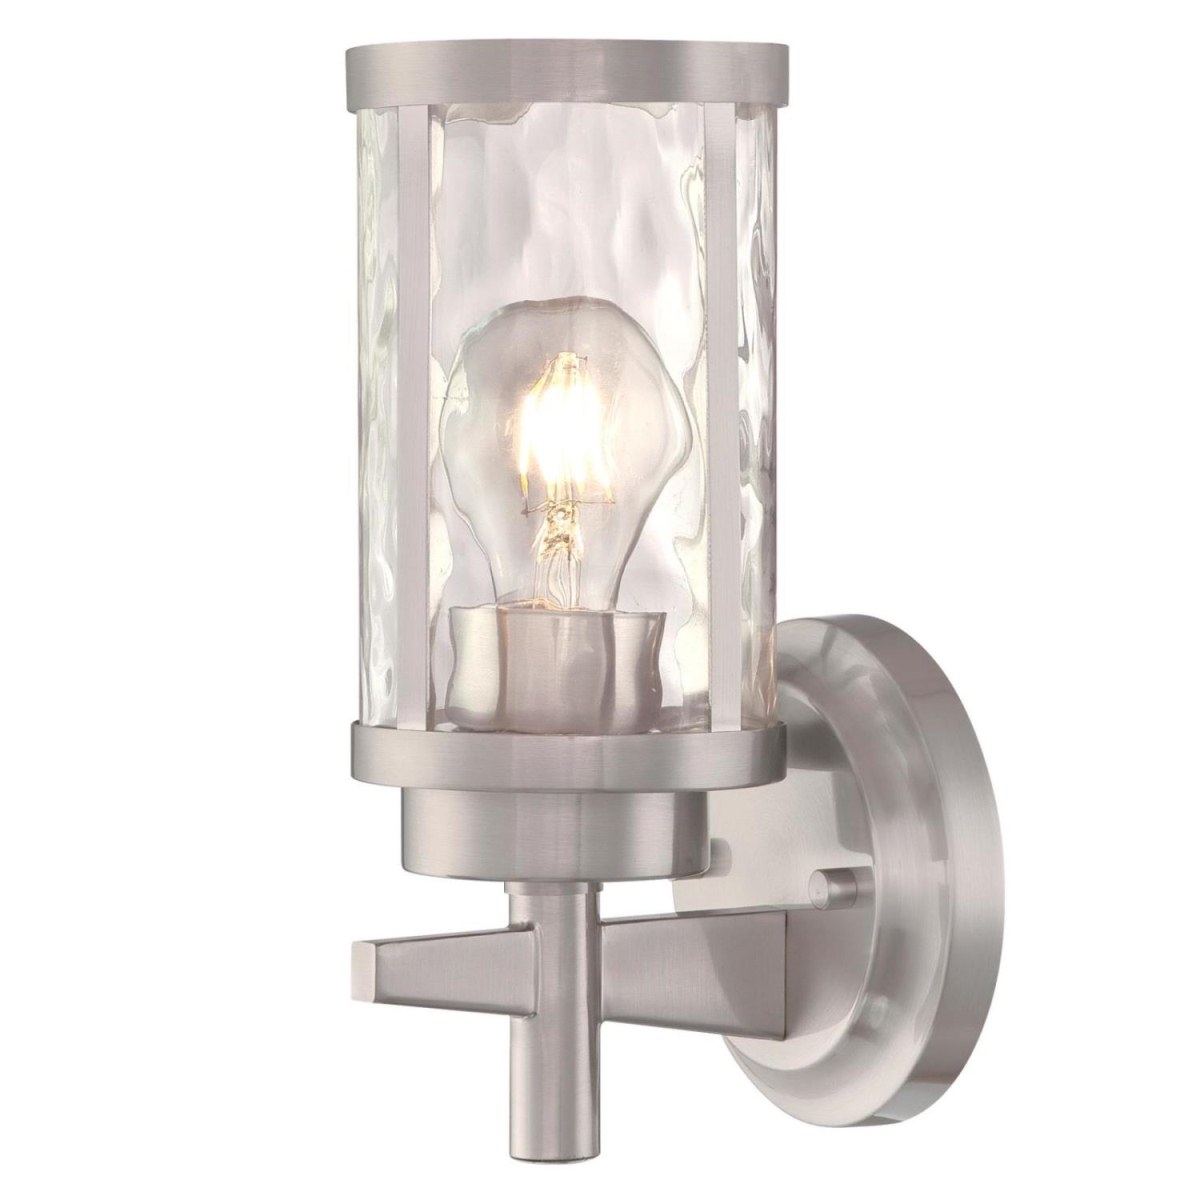 6368300 1 Light Wall Fixture With Clear Water Glass - Brushed Nickel